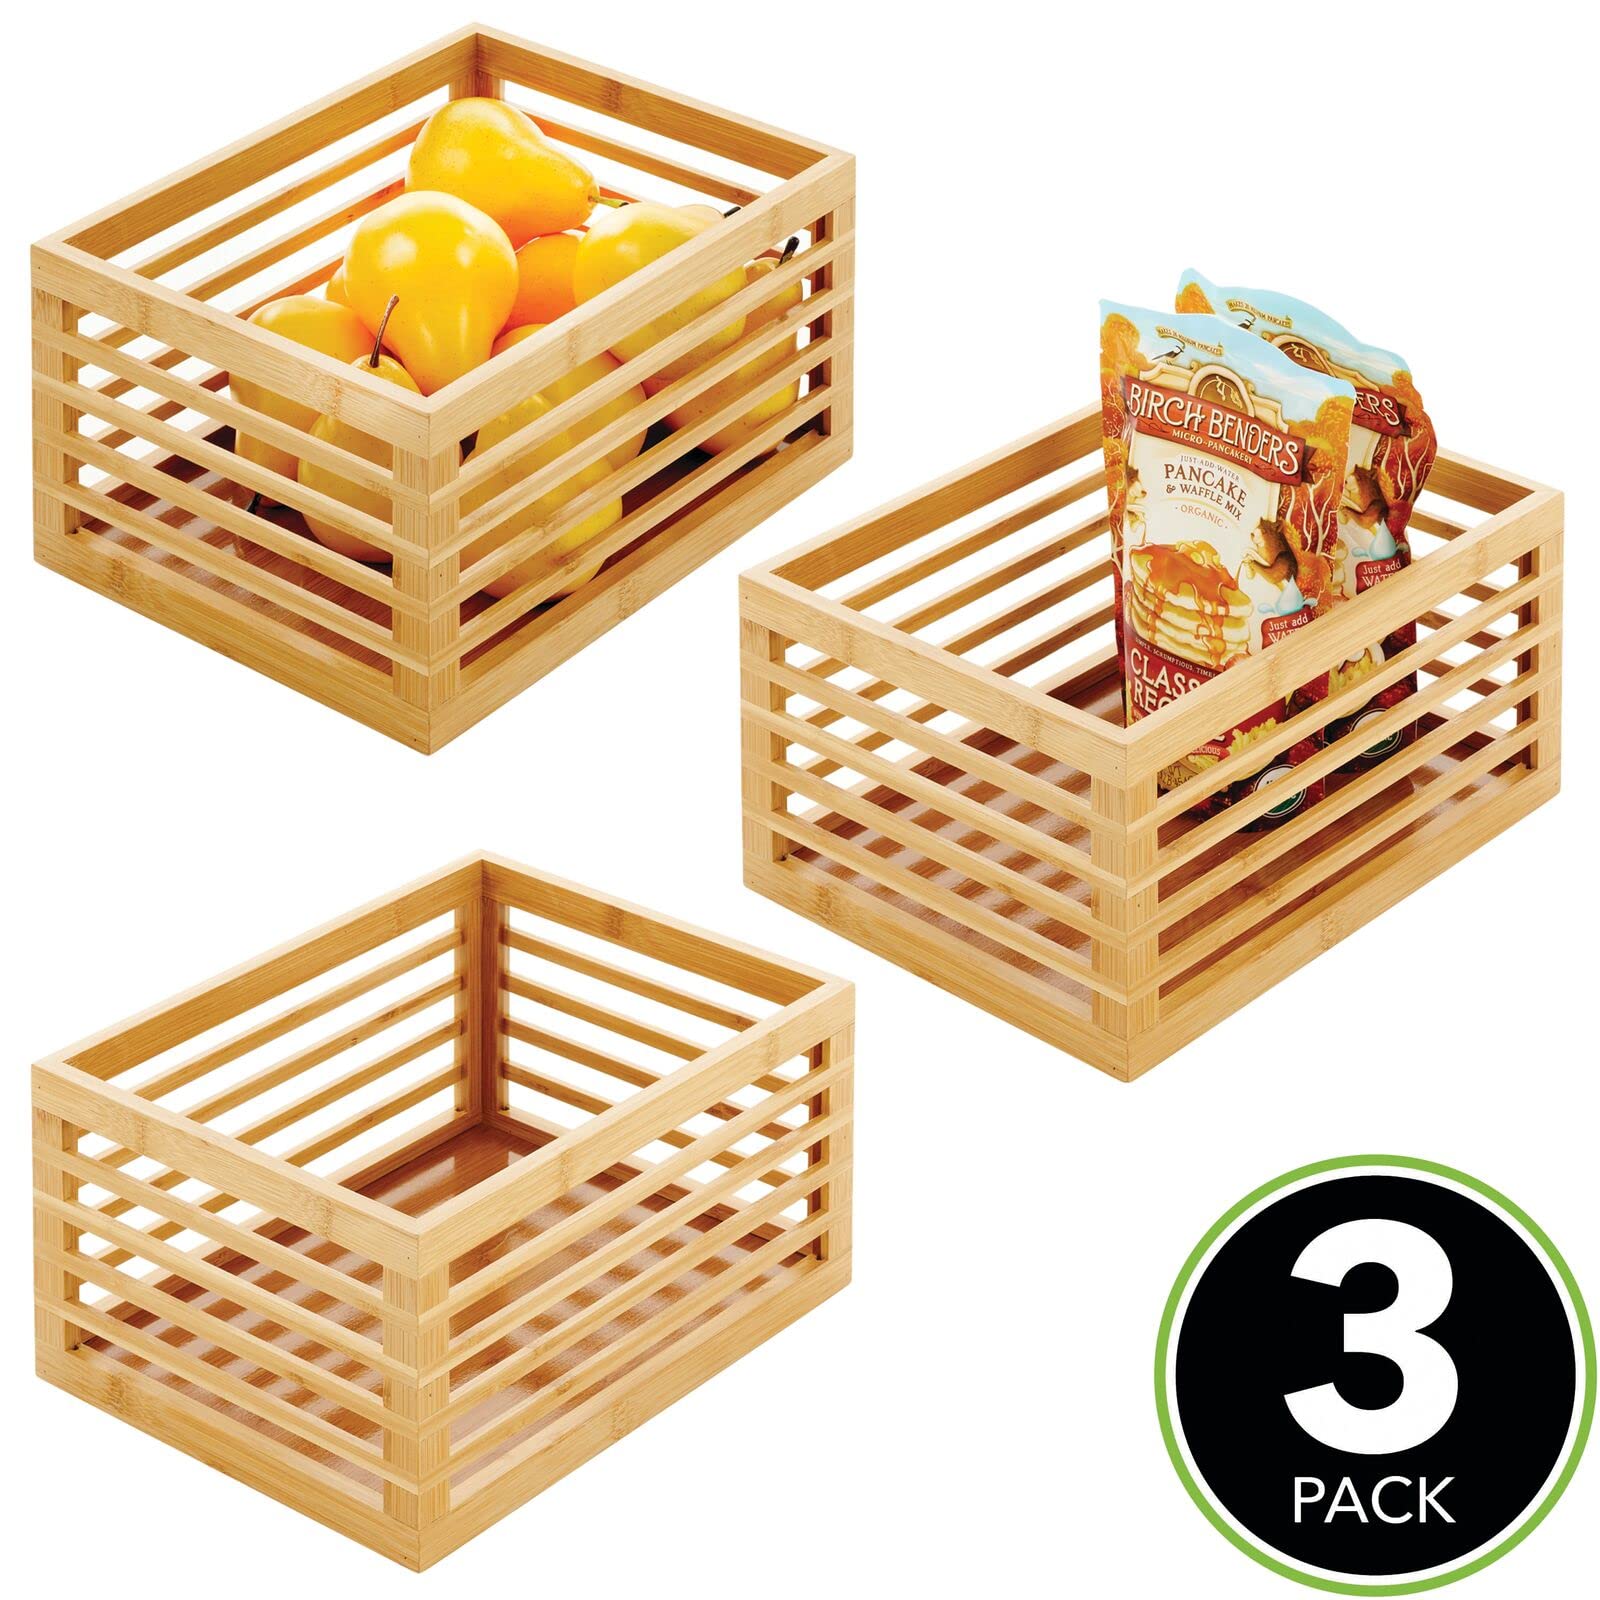 mDesign Bamboo Slotted Cabinet Shelf Storage Organizer Bin for Kitchen, Pantry, Bathroom, Bedroom, Office, Living Room Organization - Holds Food, Snacks, Fruits - Echo Collection - 3 Pack - Natural